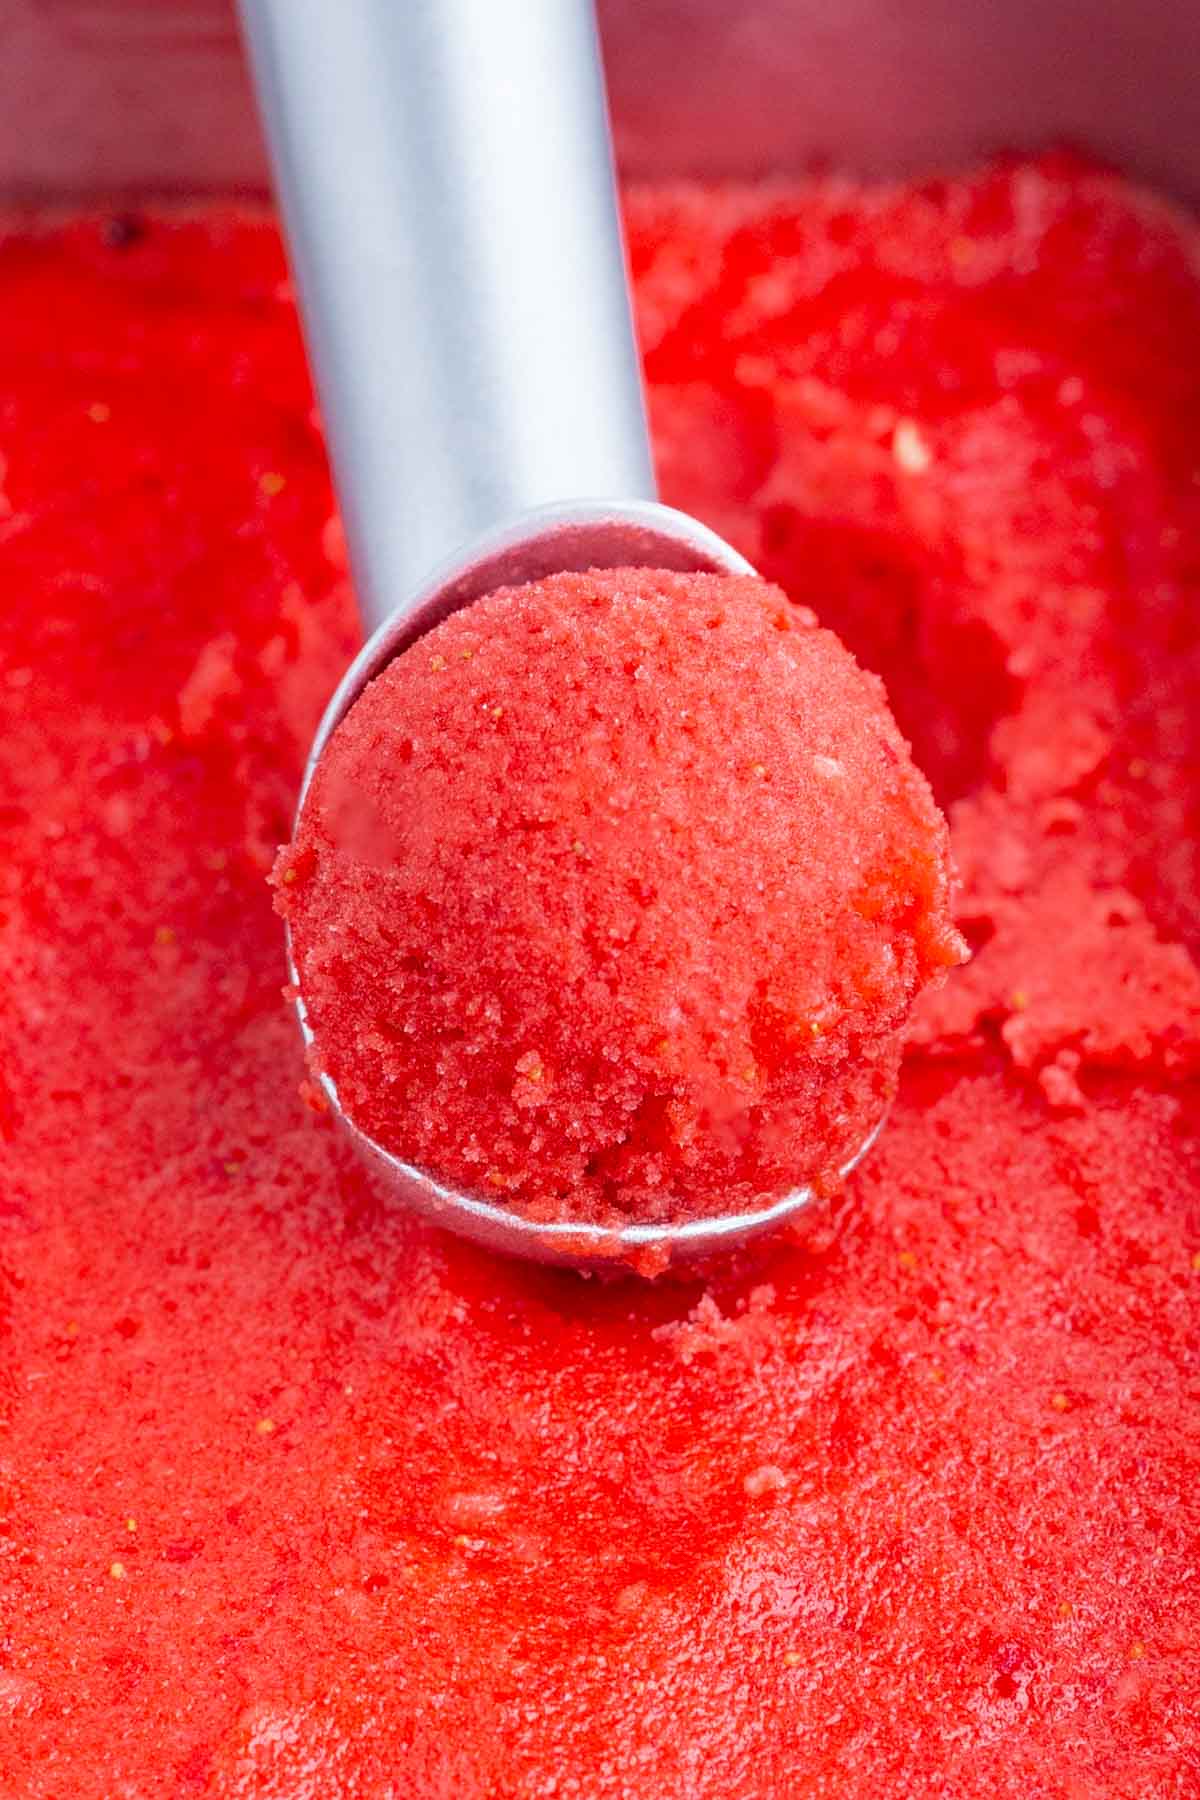 An ice cream scoop is used to serve strawberry sorbet.